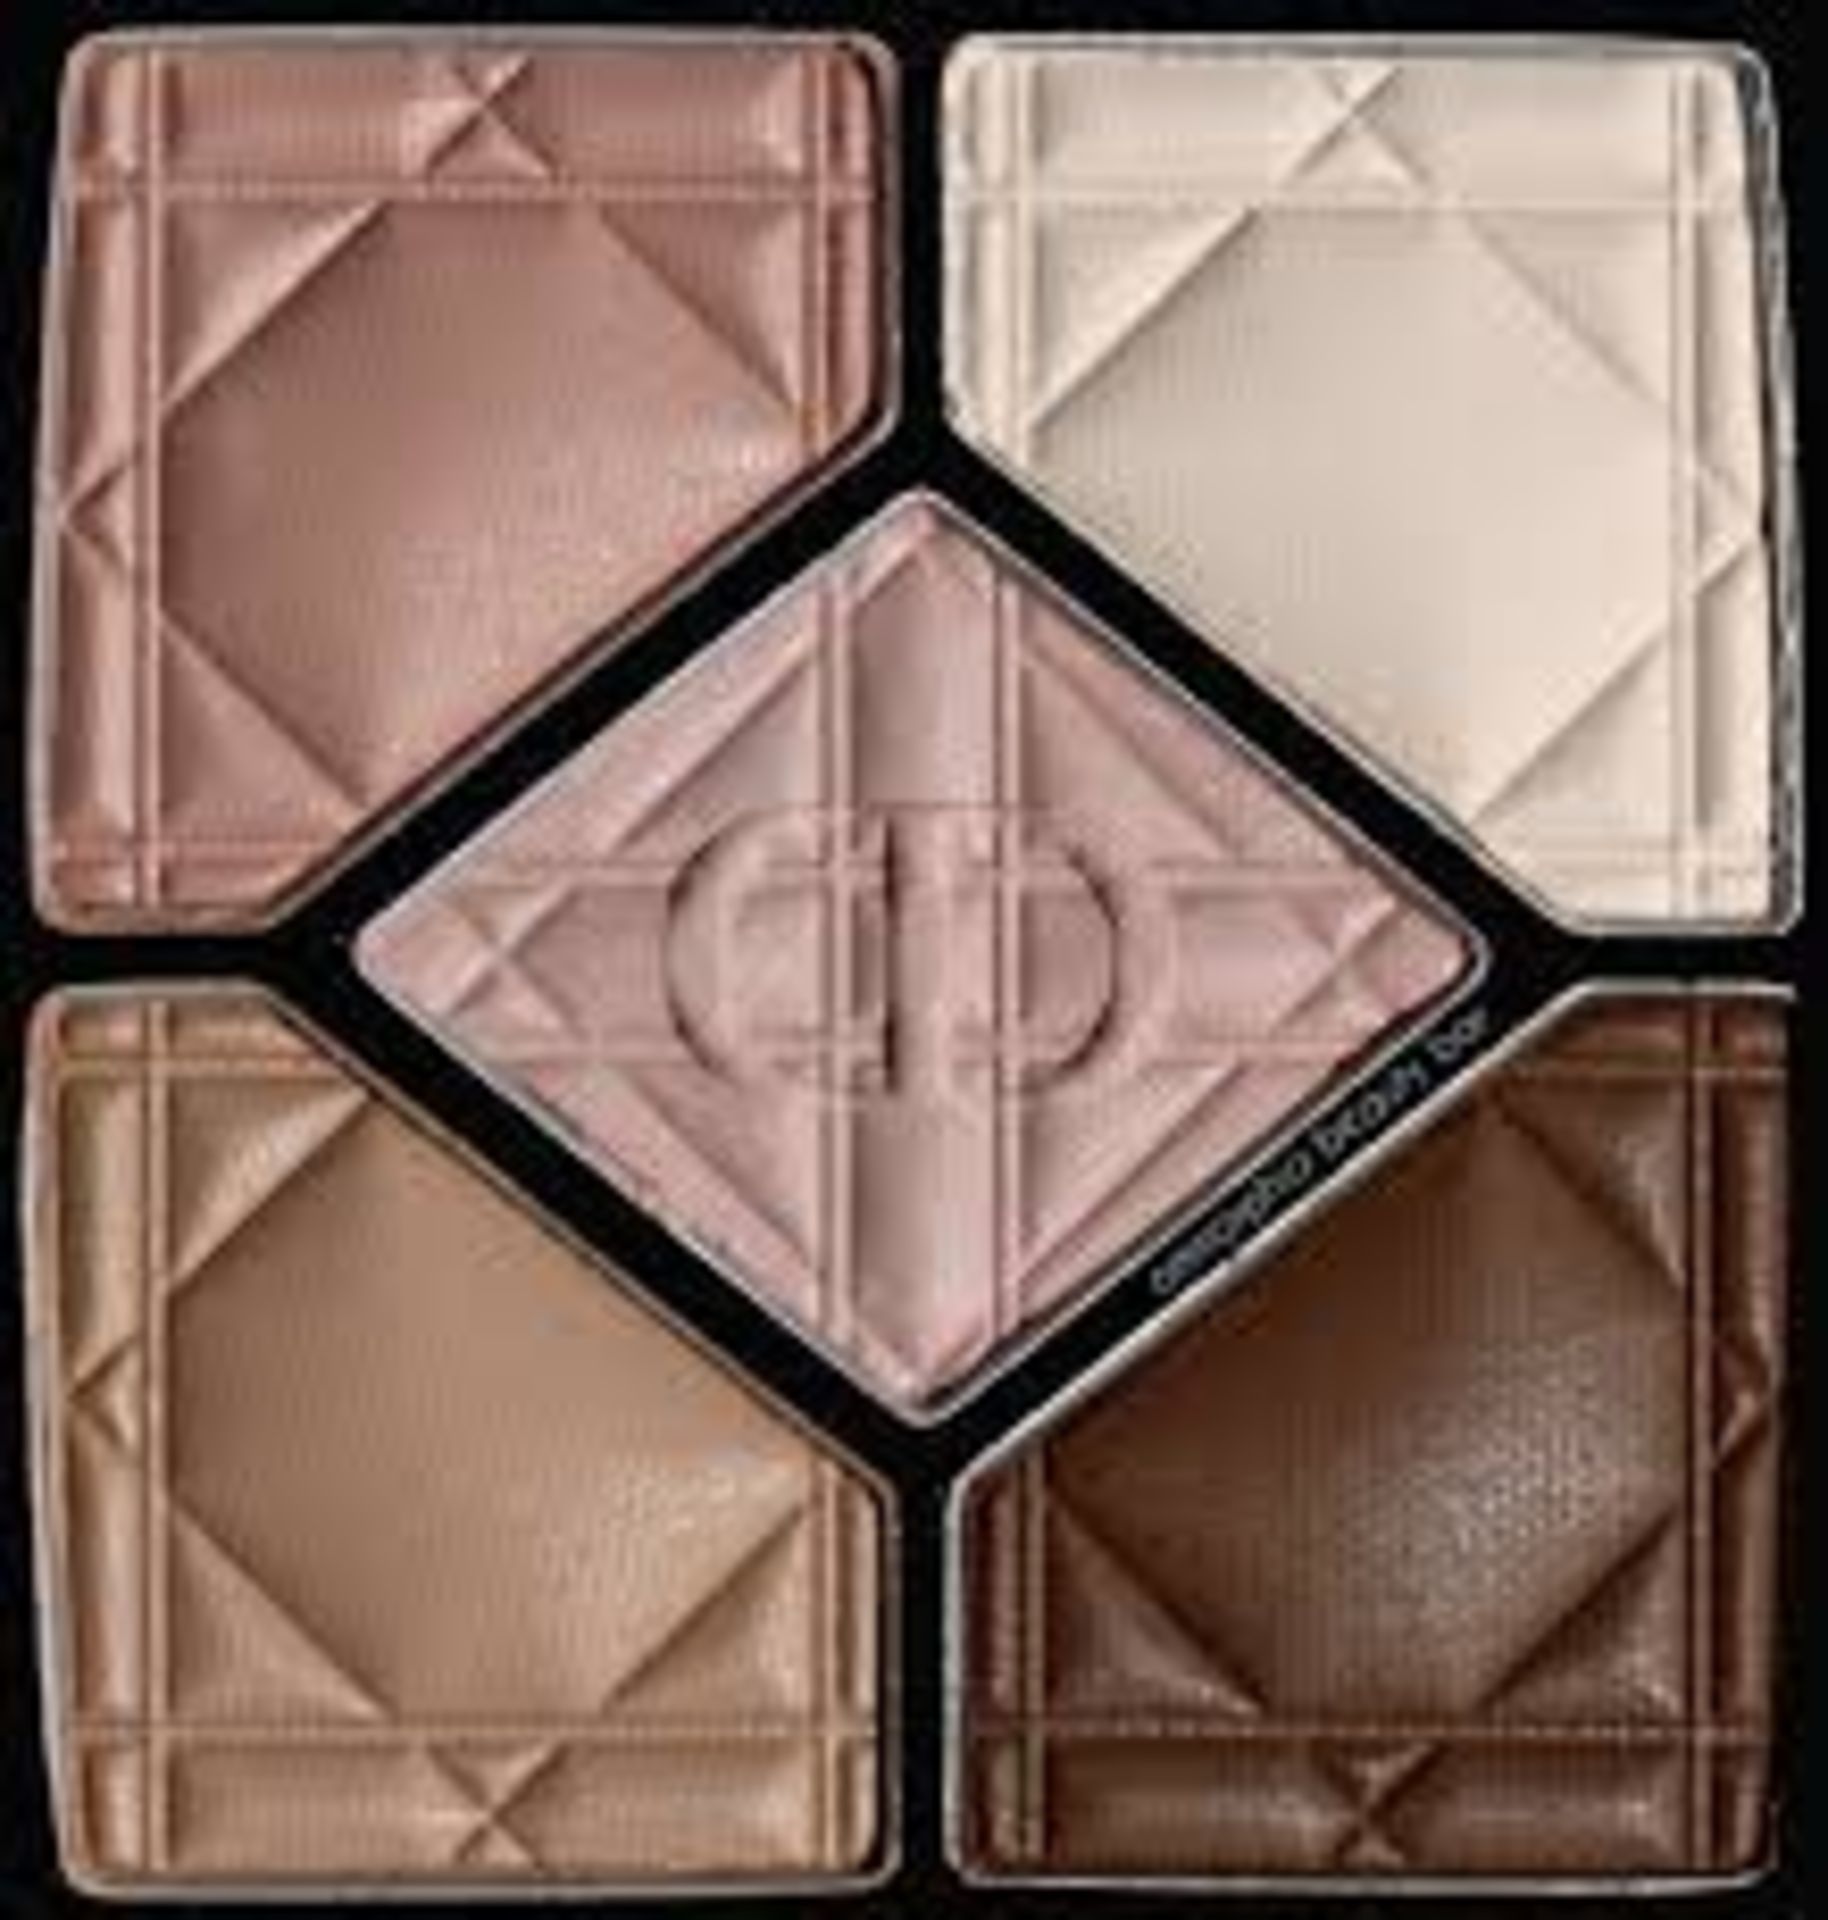 RRP £47 Dior 5 Couleurs Eyeshadow (Shade 537 Touch) (Ex Display) (Appraisals Available Upon Request)